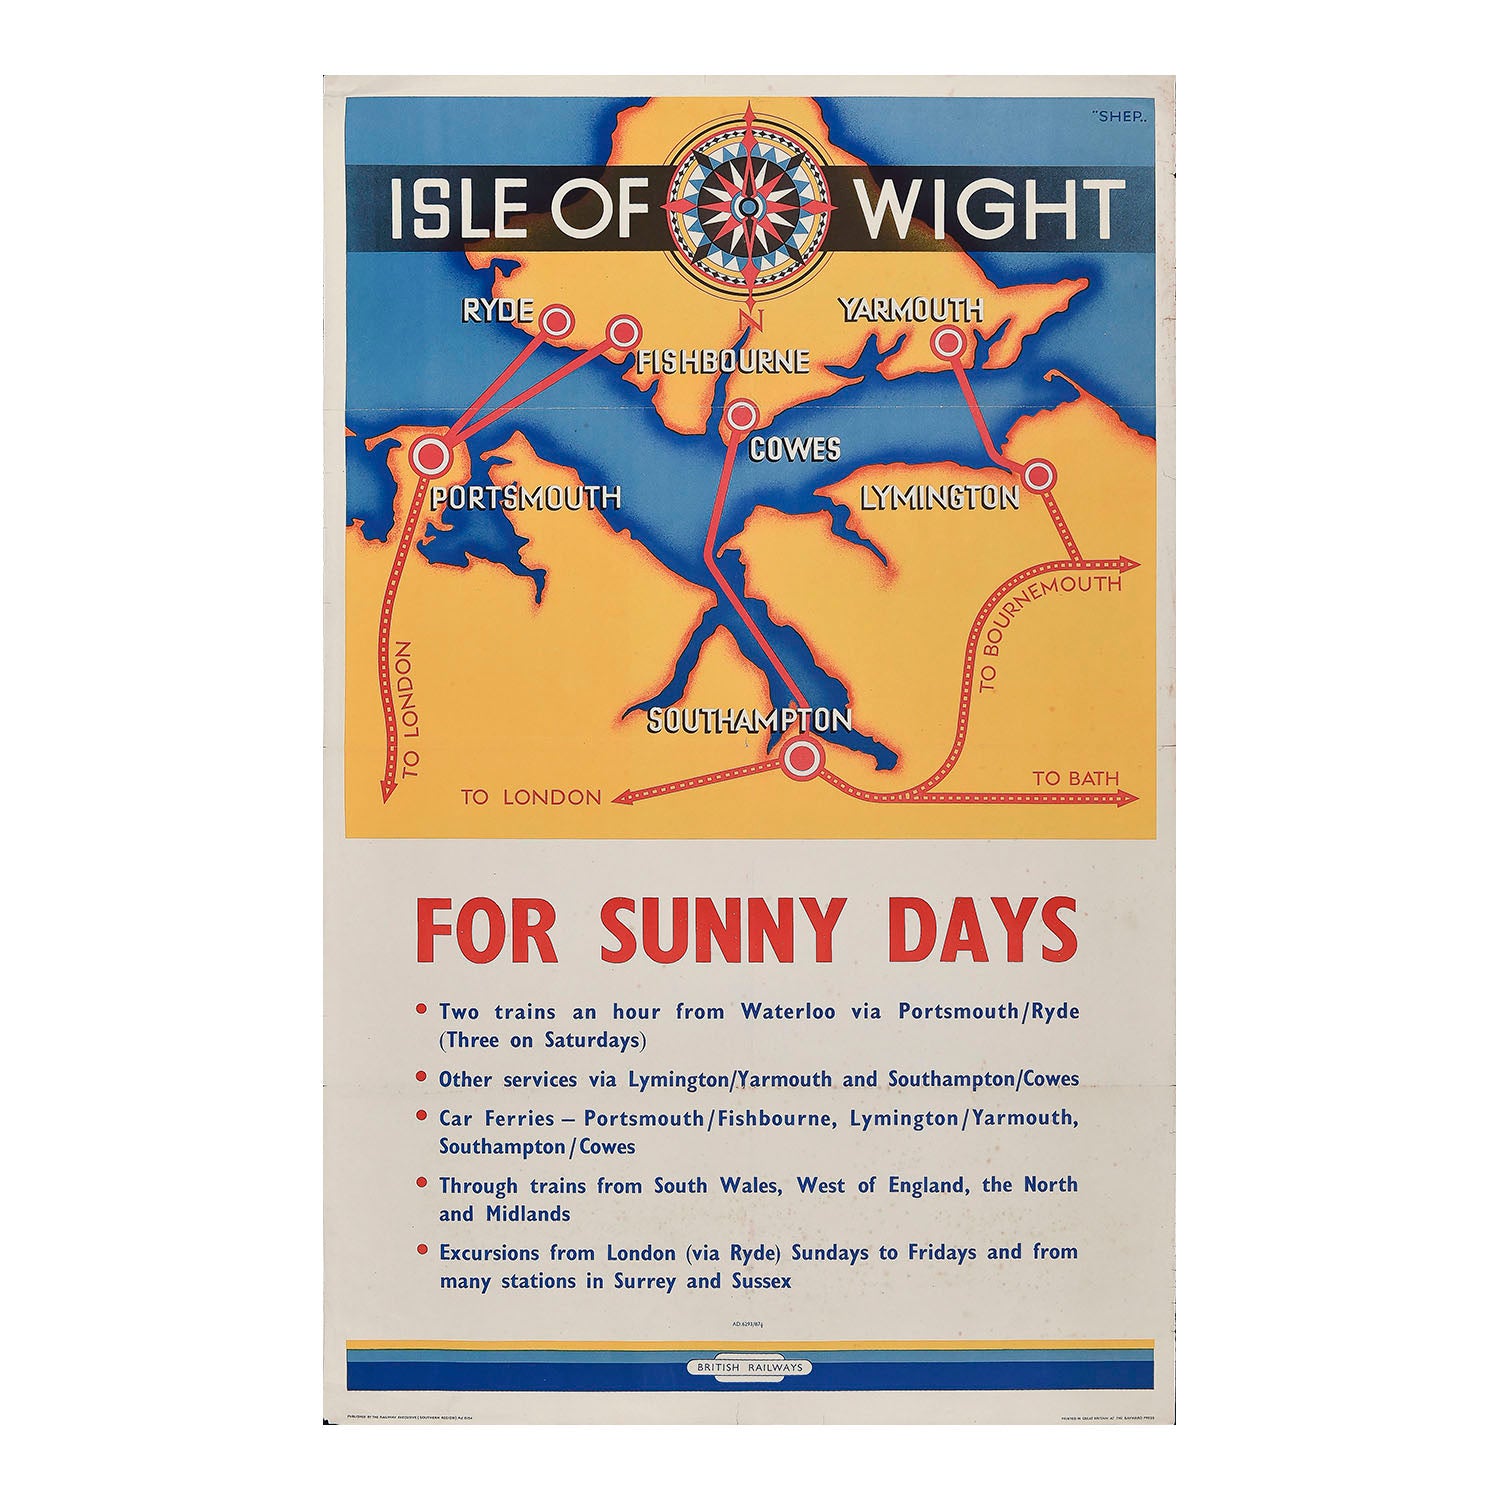 Original British Railways poster, Isle of Wight for Sunny Days, by ‘Shep’ (Charles Shepherd) c. 1950. The design features an unusual depiction of the Isle of Wight at the top of the poster, with the British mainland. Also includes ferry routes from England to Ryde, Fishbourne, Cowes and Yarmouth, with information about connecting trains printed in the lower half